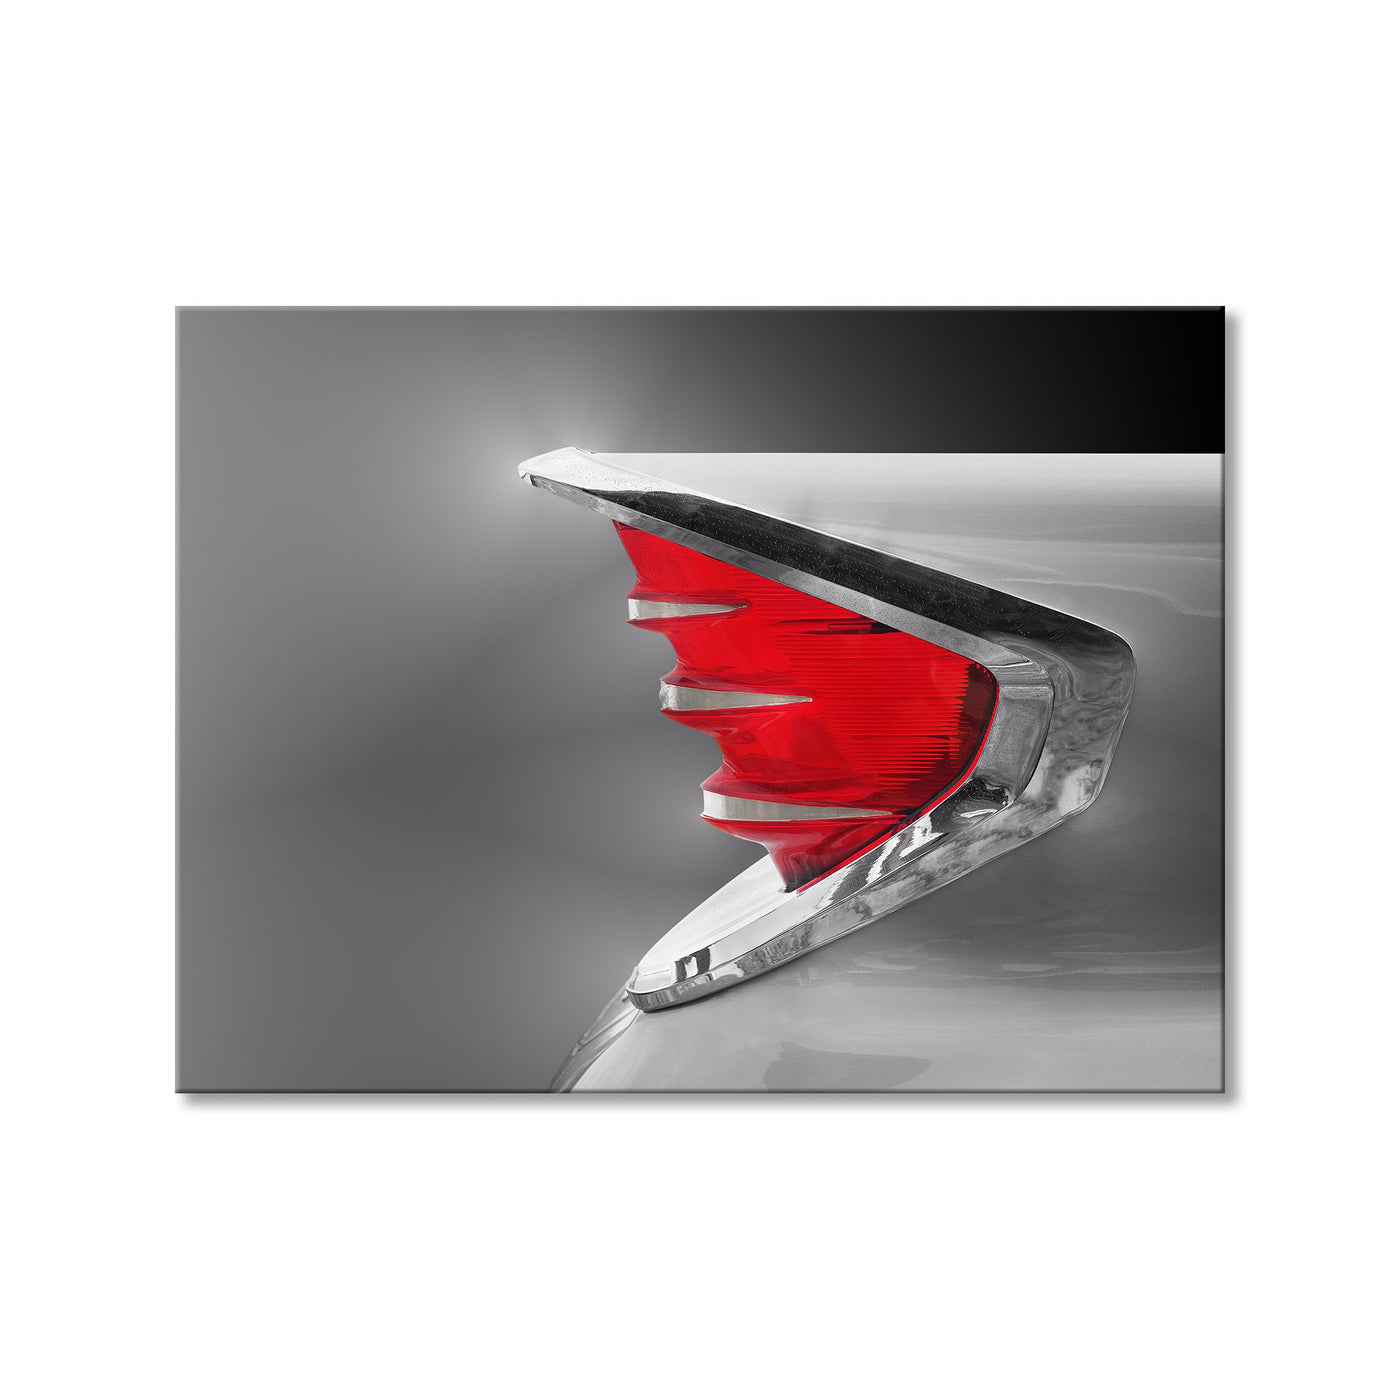 US Classic Car 1960 Fire Flite Tail Fin Abstract